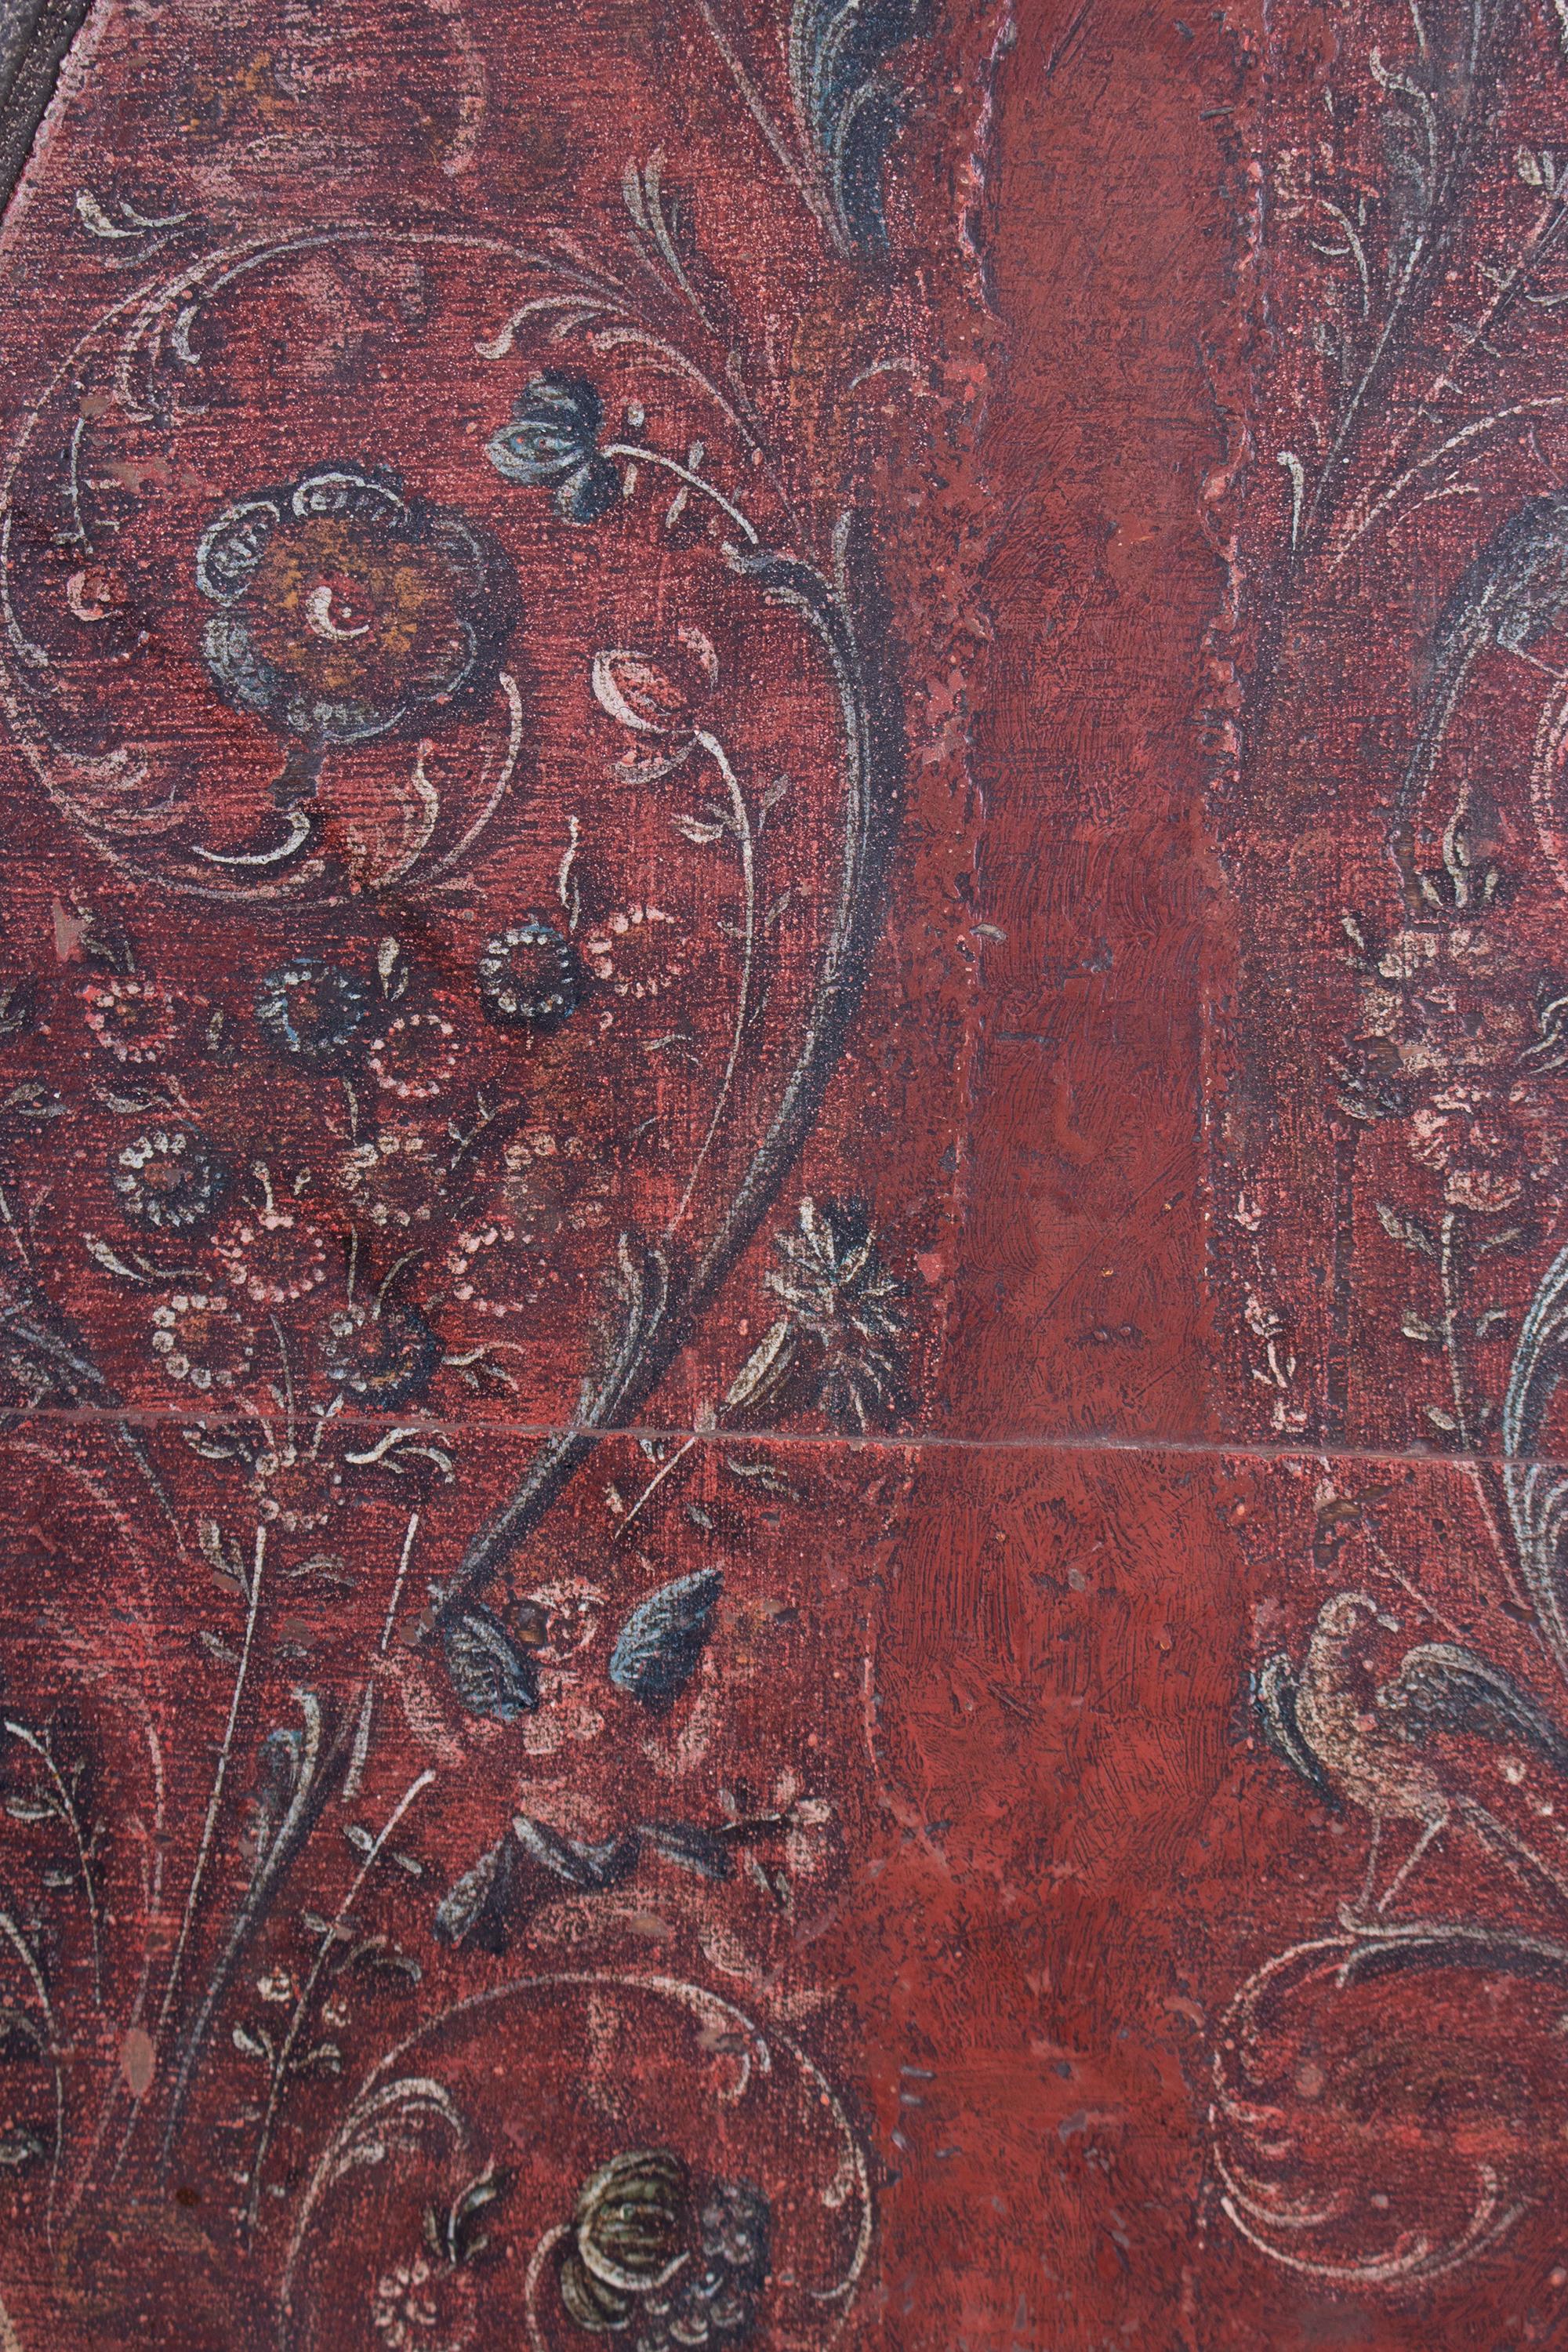 Wood Three-Legged Painted Table with People and Flower Motifs, 17th Century, Italian